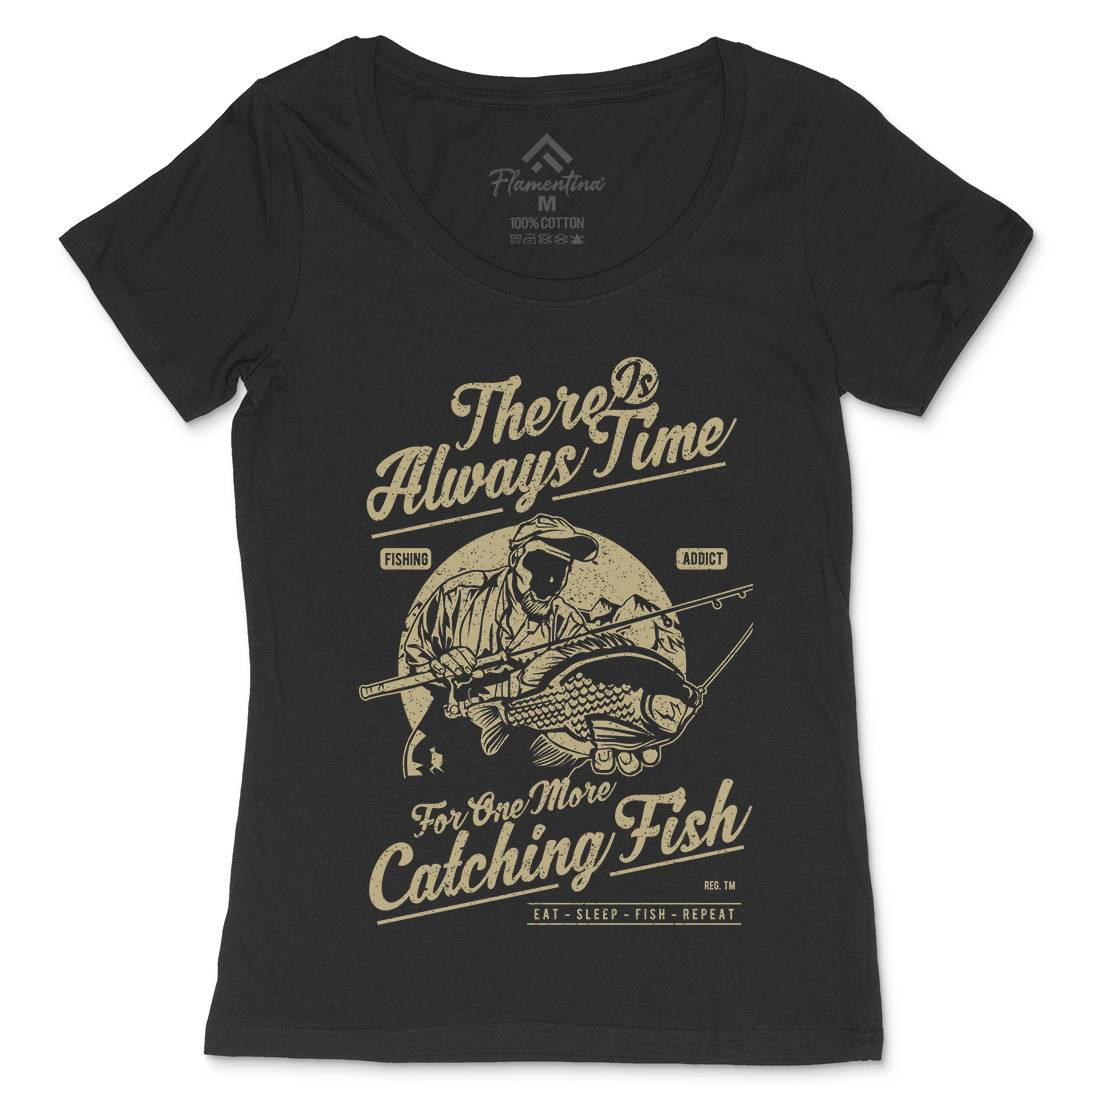 One More Catching Womens Scoop Neck T-Shirt Fishing A731